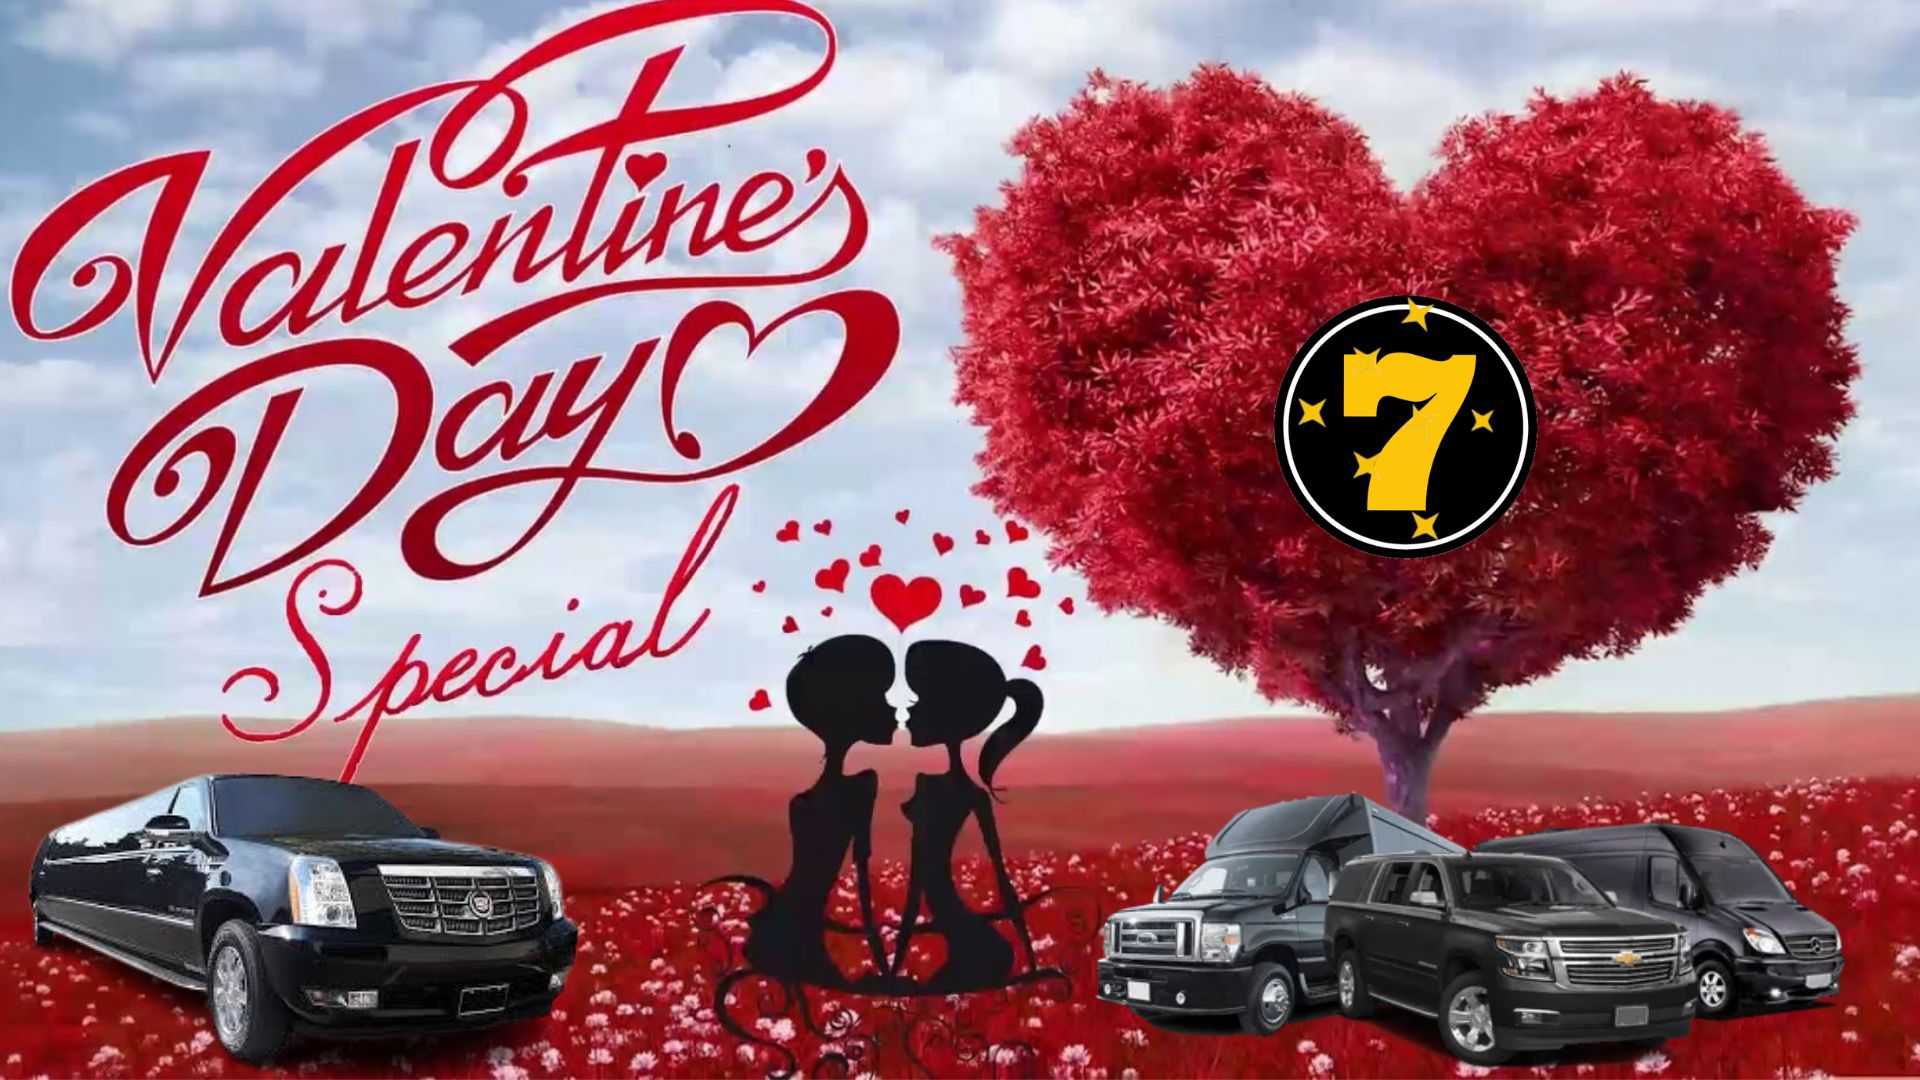 Long Island limo service on Valentines Day